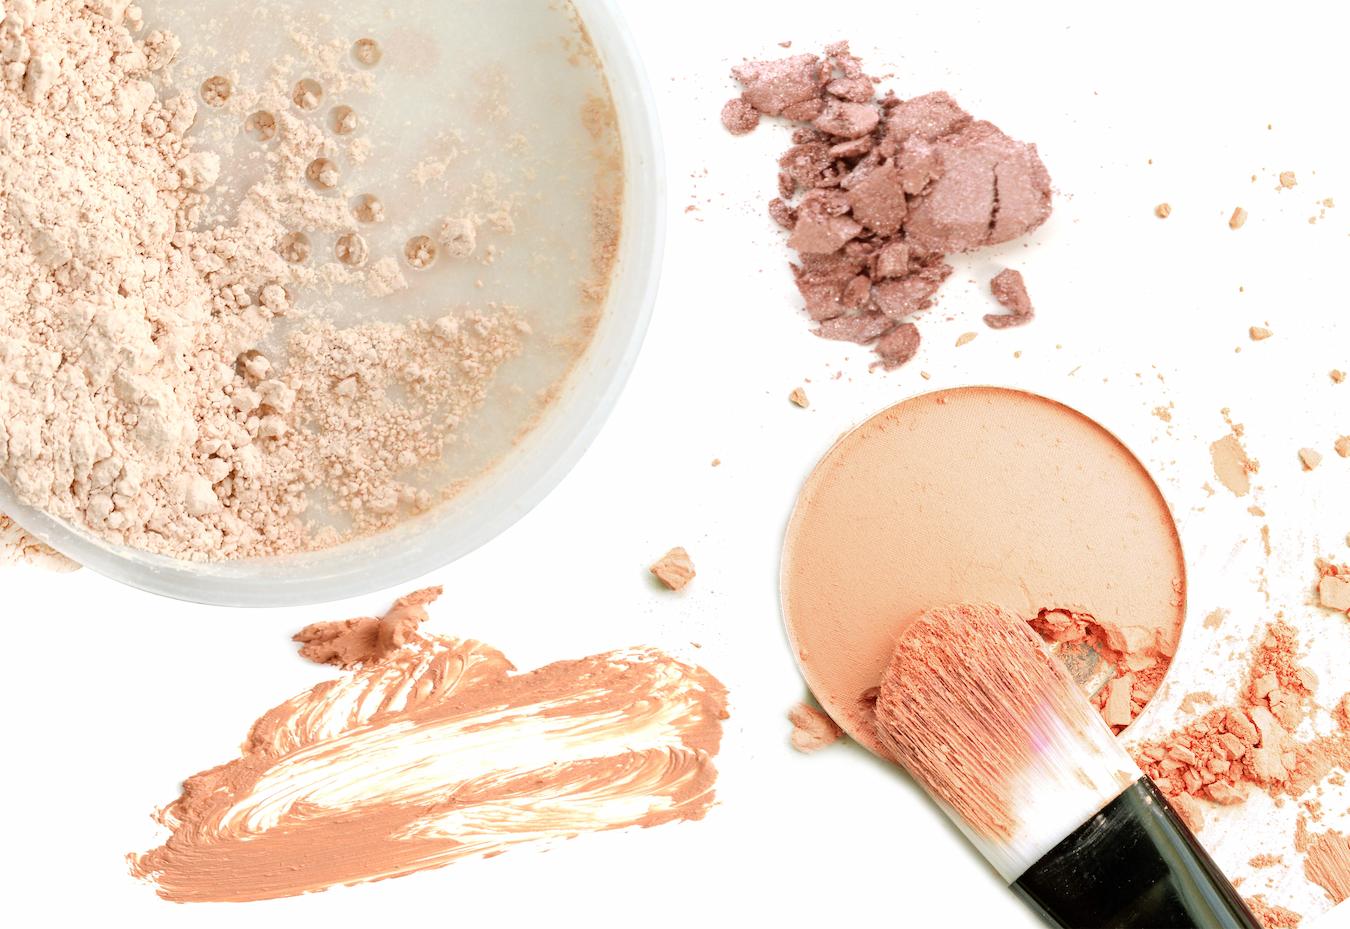 Mineral makeup products are beauty products that contain natural ingredients like mineral powder